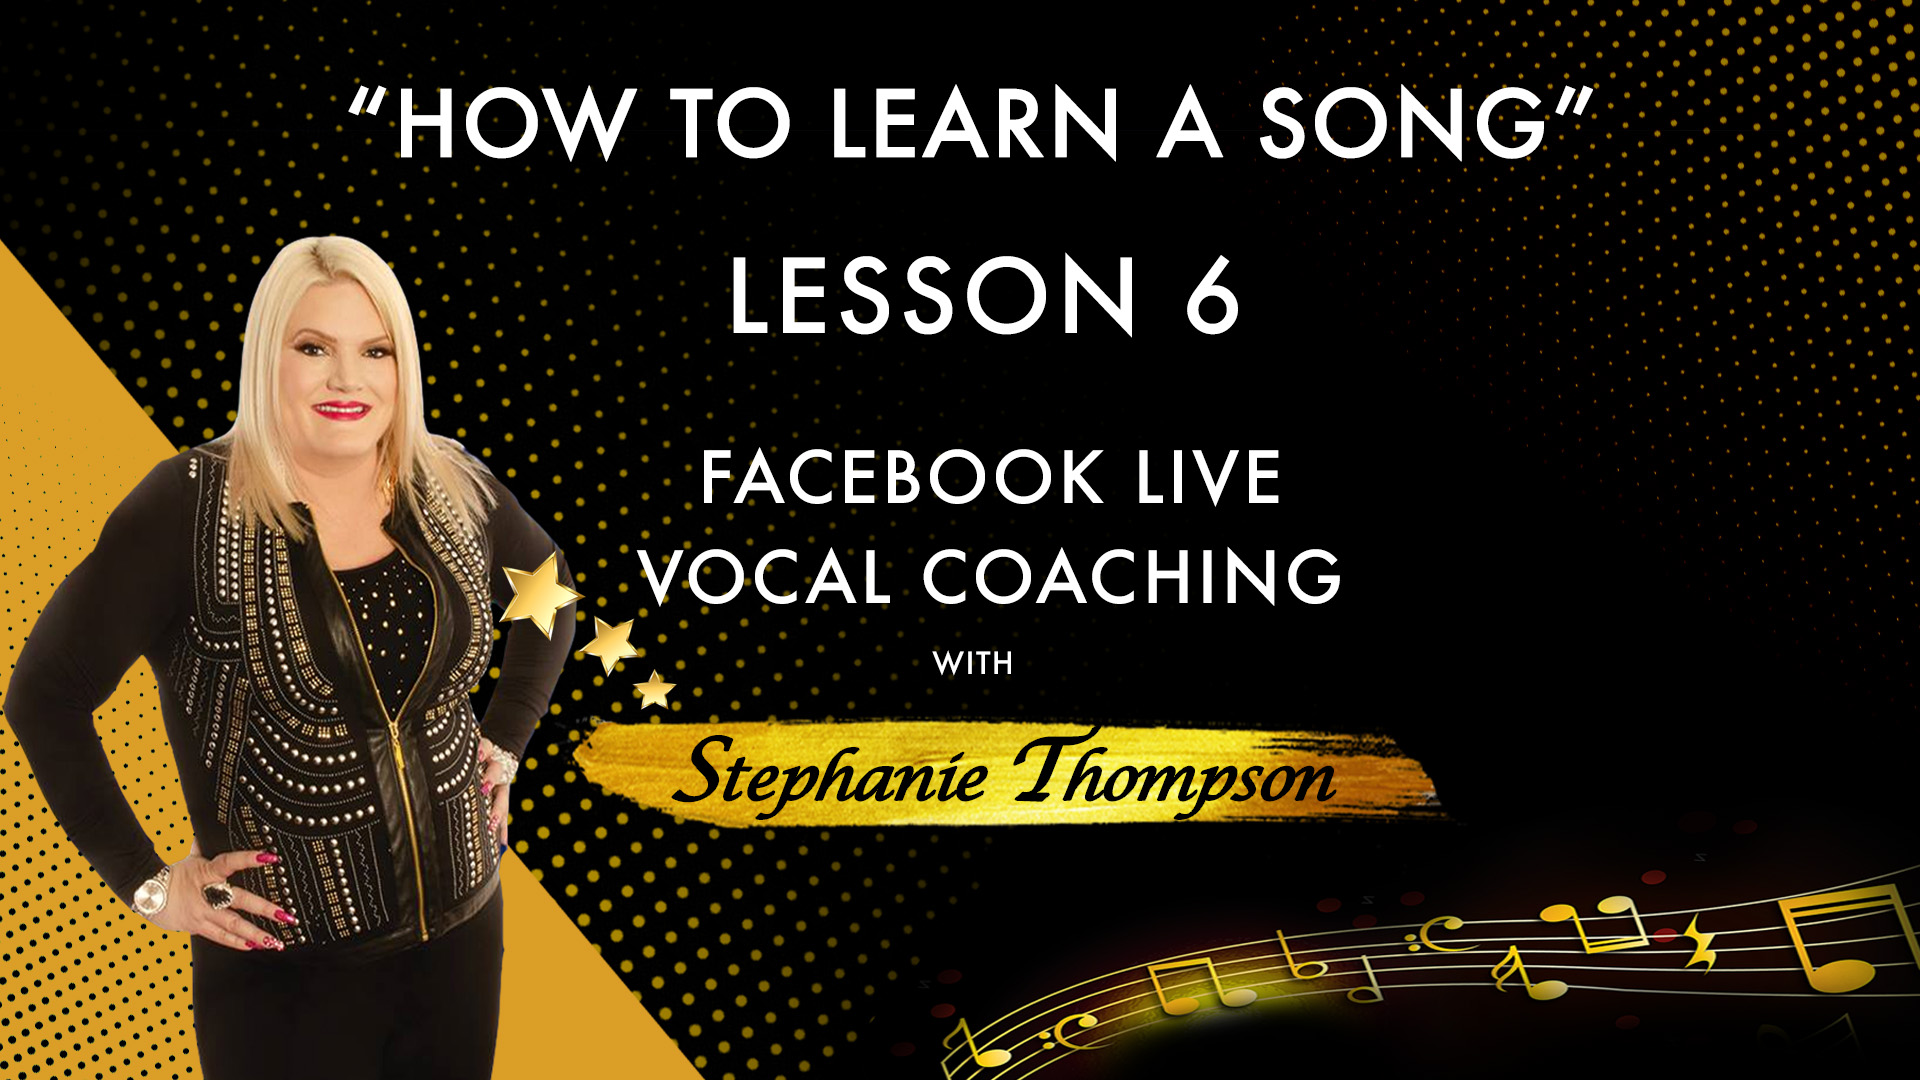 Lesson 6 - How to Learn a Song